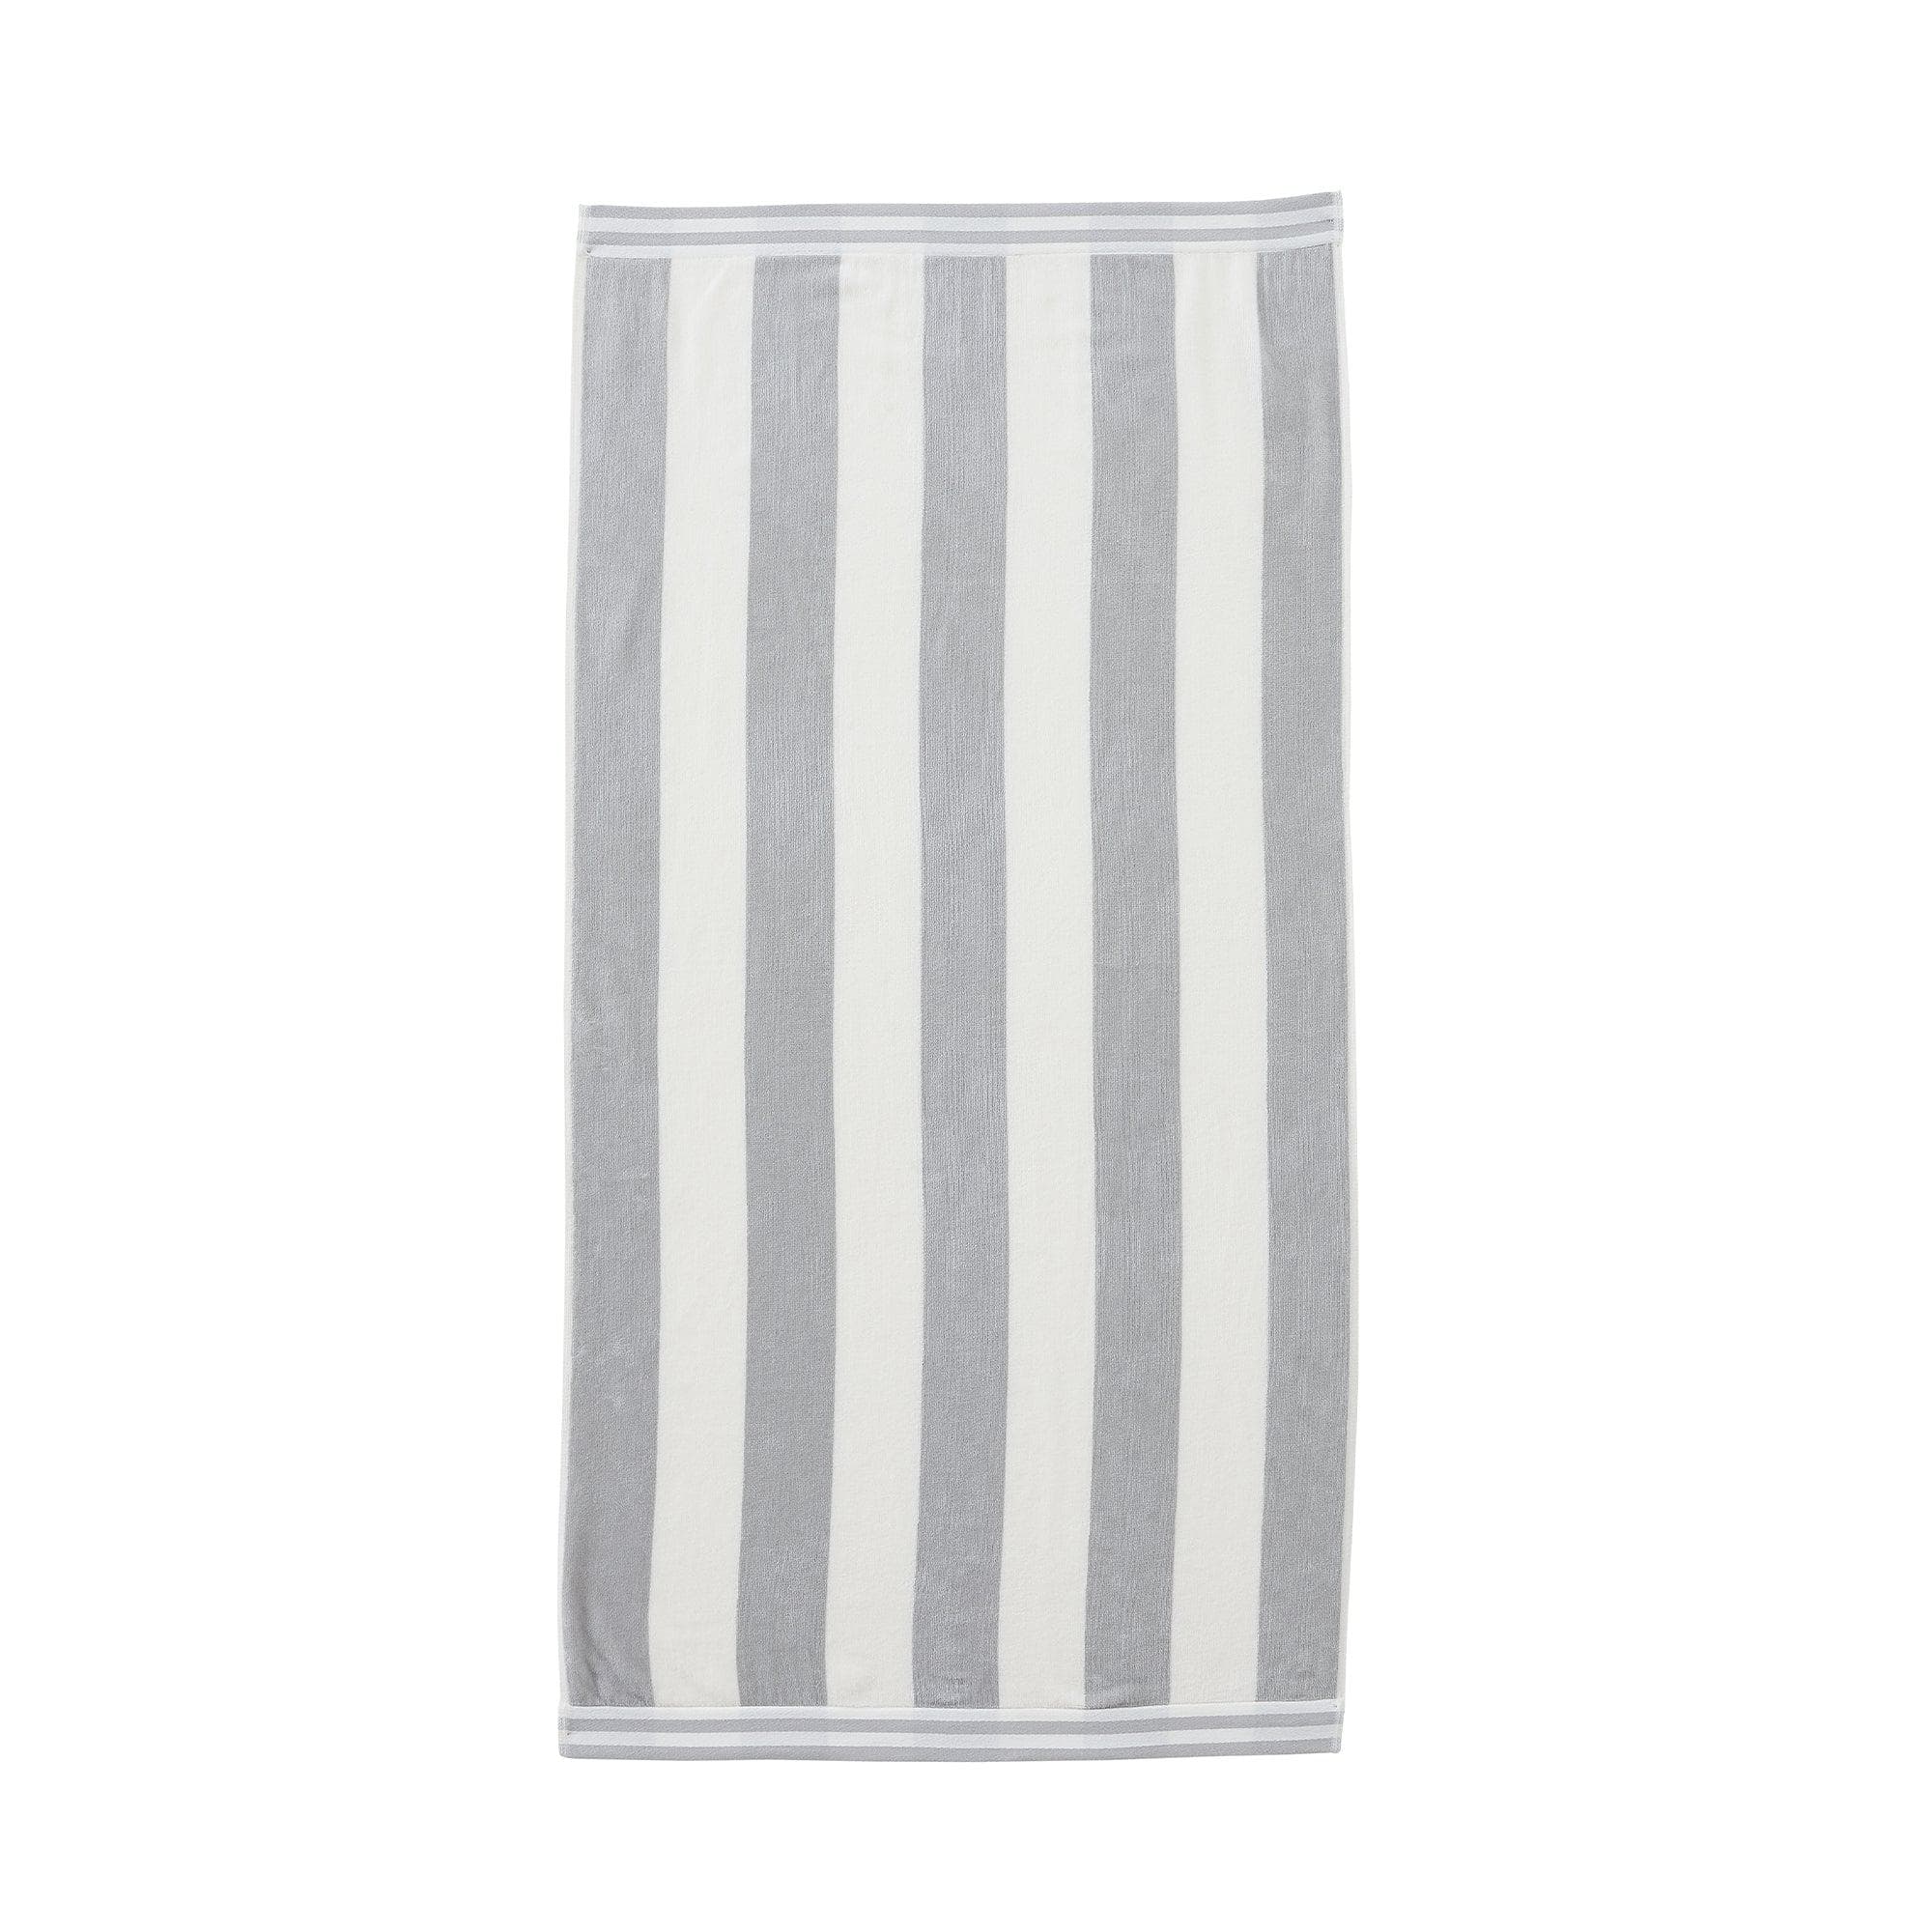  Great Bay Home Large Cotton Towel Set of 4, Cabana Striped  Beach Towels for Adults and Lightweight Pool Towels, Quick Dry Pack and  Charcoal Grey and White : Home & Kitchen